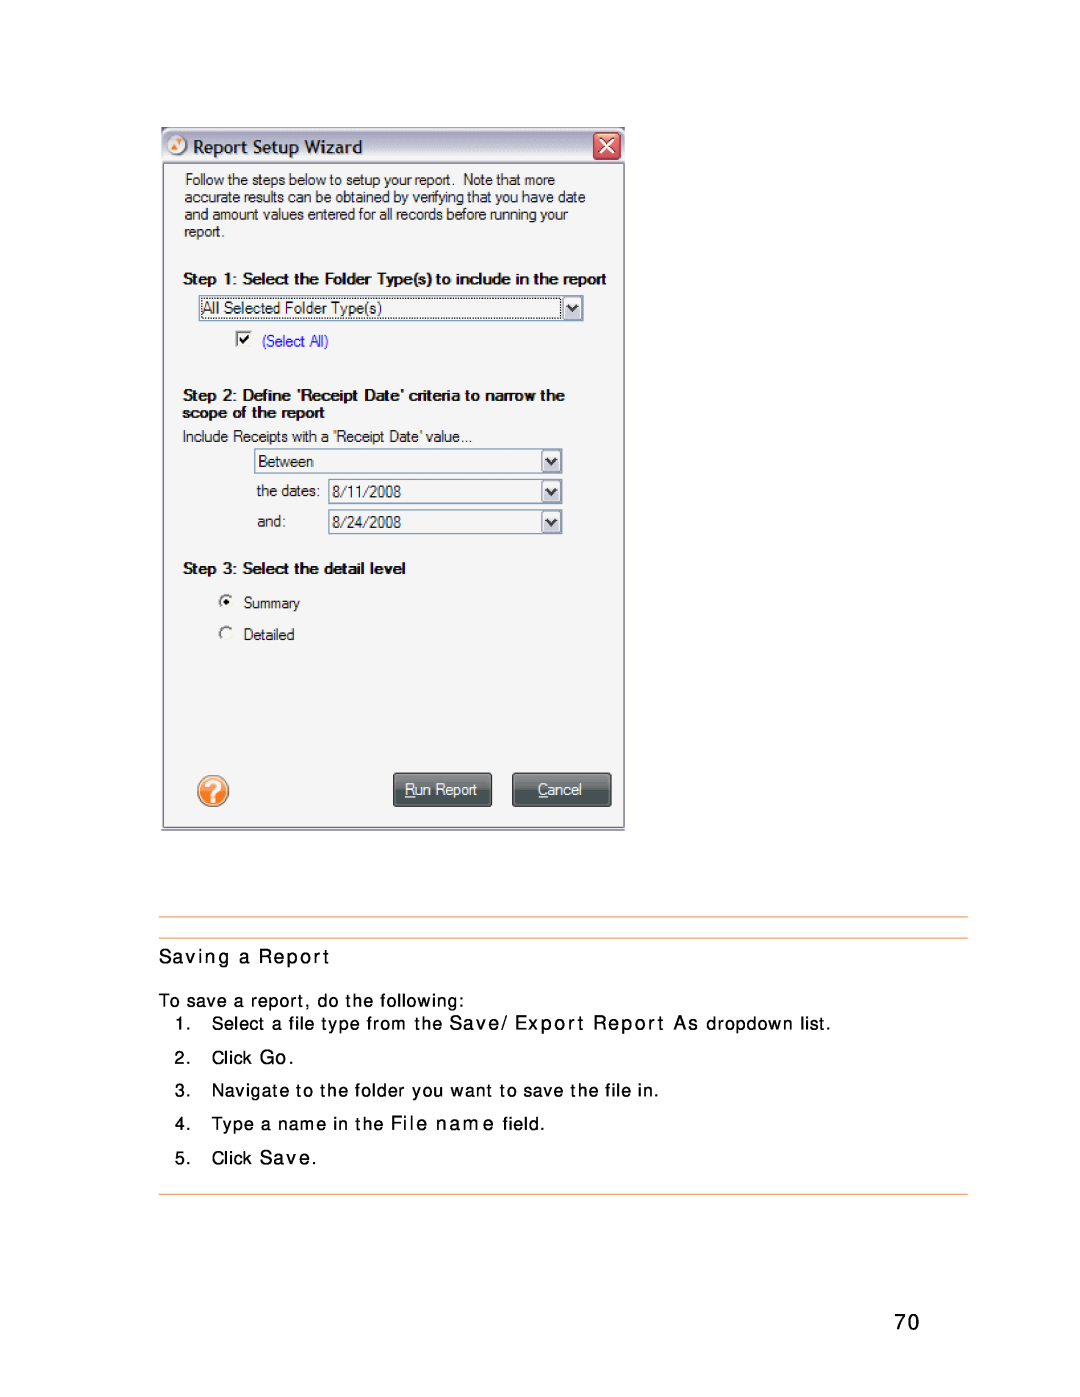 Univex NeatReceipts Saving a Report, To save a report, do the following, Type a name in the File name field 5. Click Save 